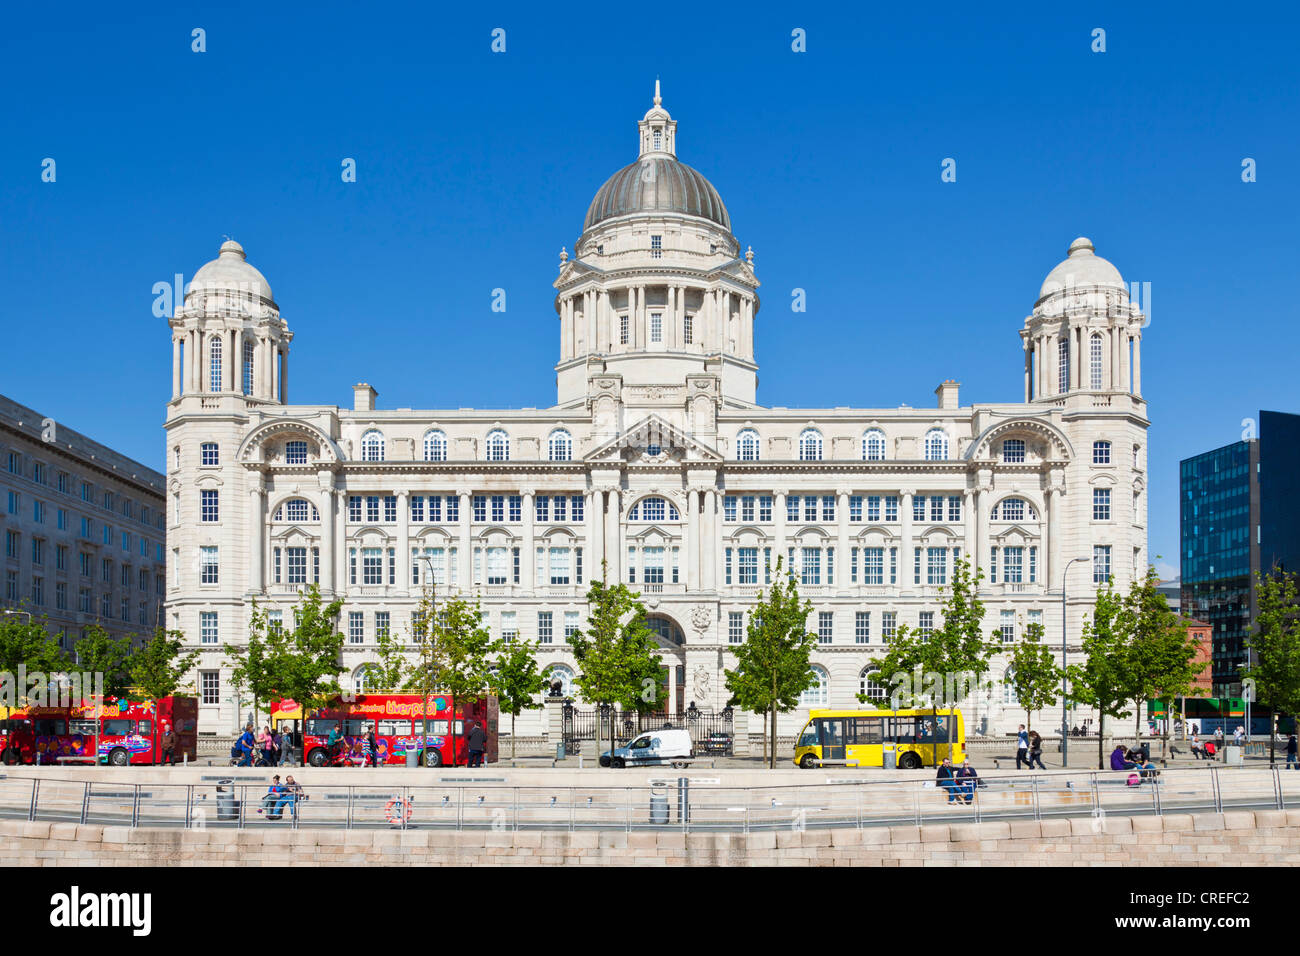 Port of Liverpool Building Liverpool waterfront Pier Head Merseyside England uk gb eu Europe Banque D'Images